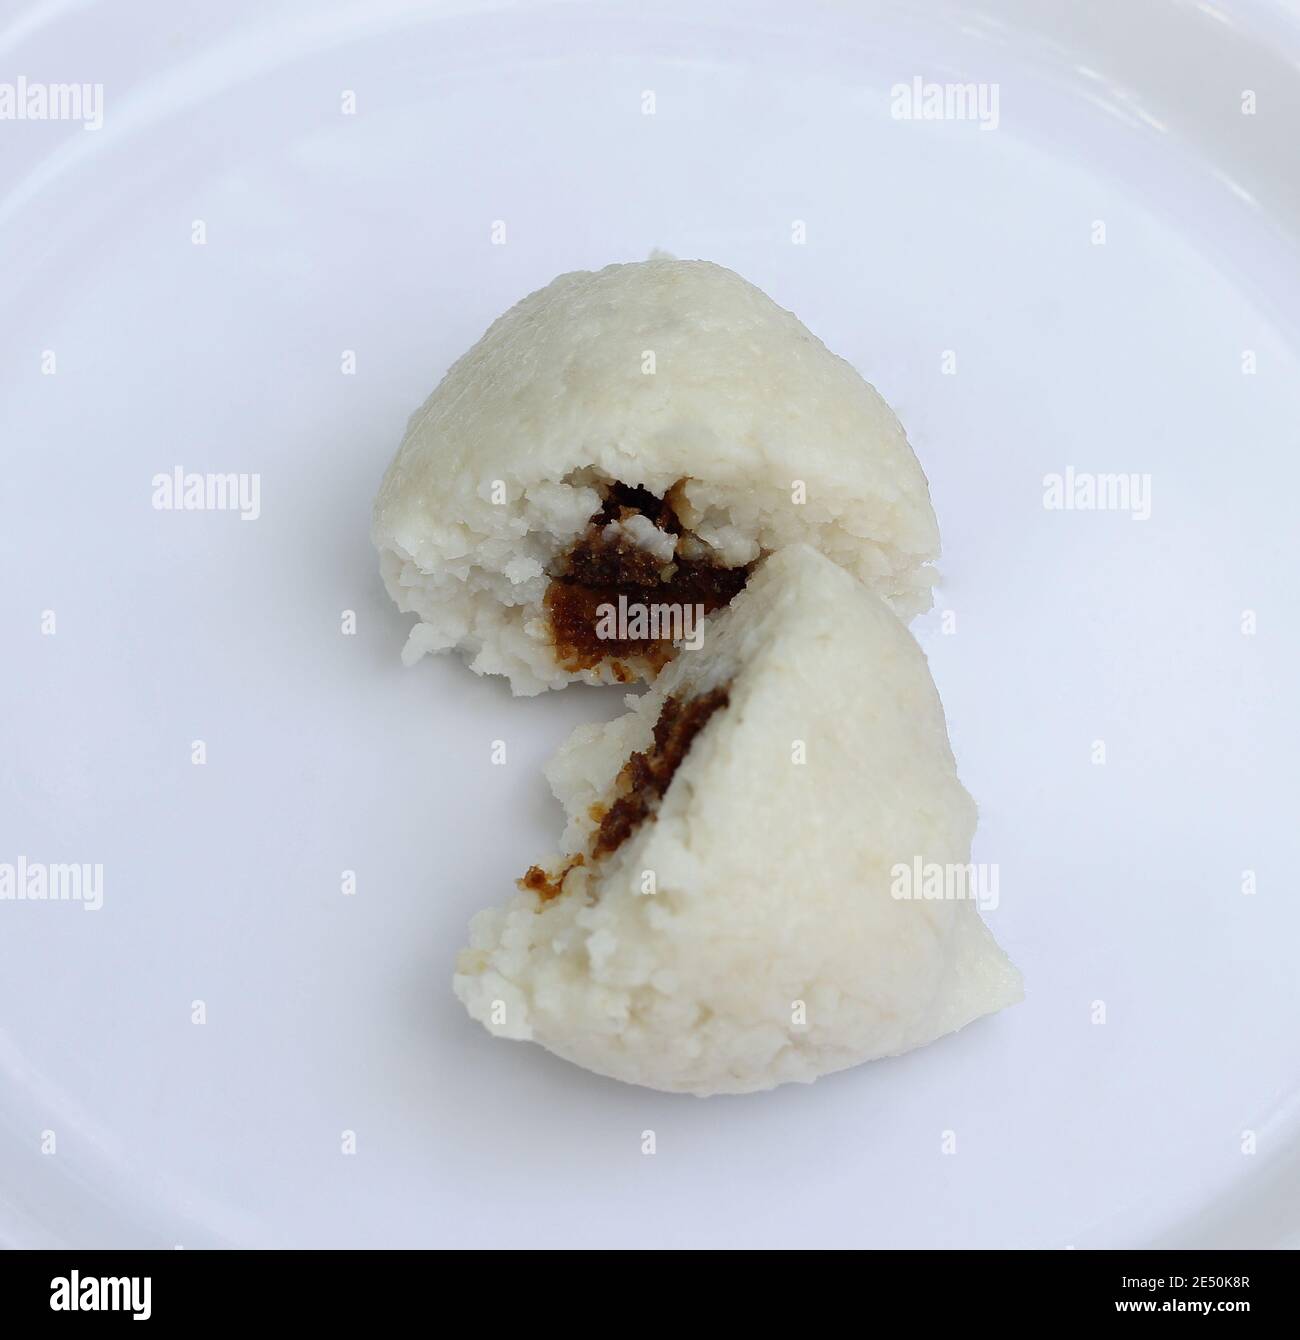 Selective focuse on sweet filling made of coconut and jaggery on a sliced cylindrical shape Imbul Kiribath Stock Photo